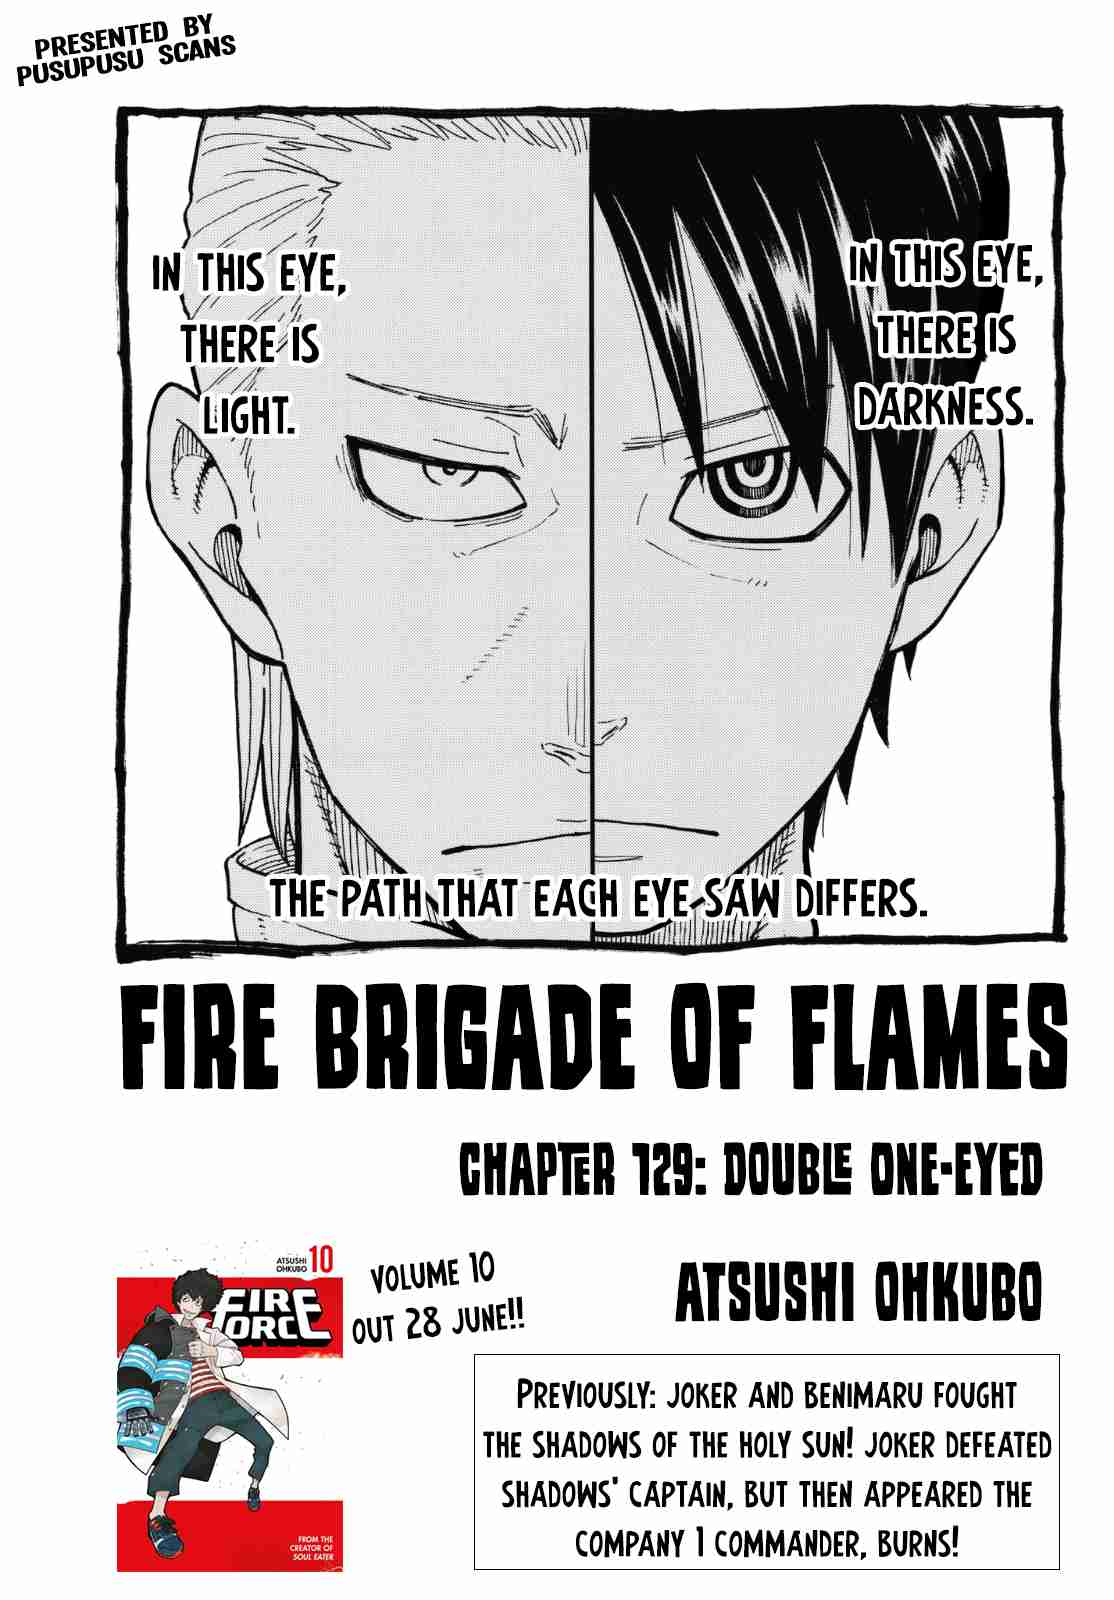 Fire Force Ch. 129 Double One Eyed